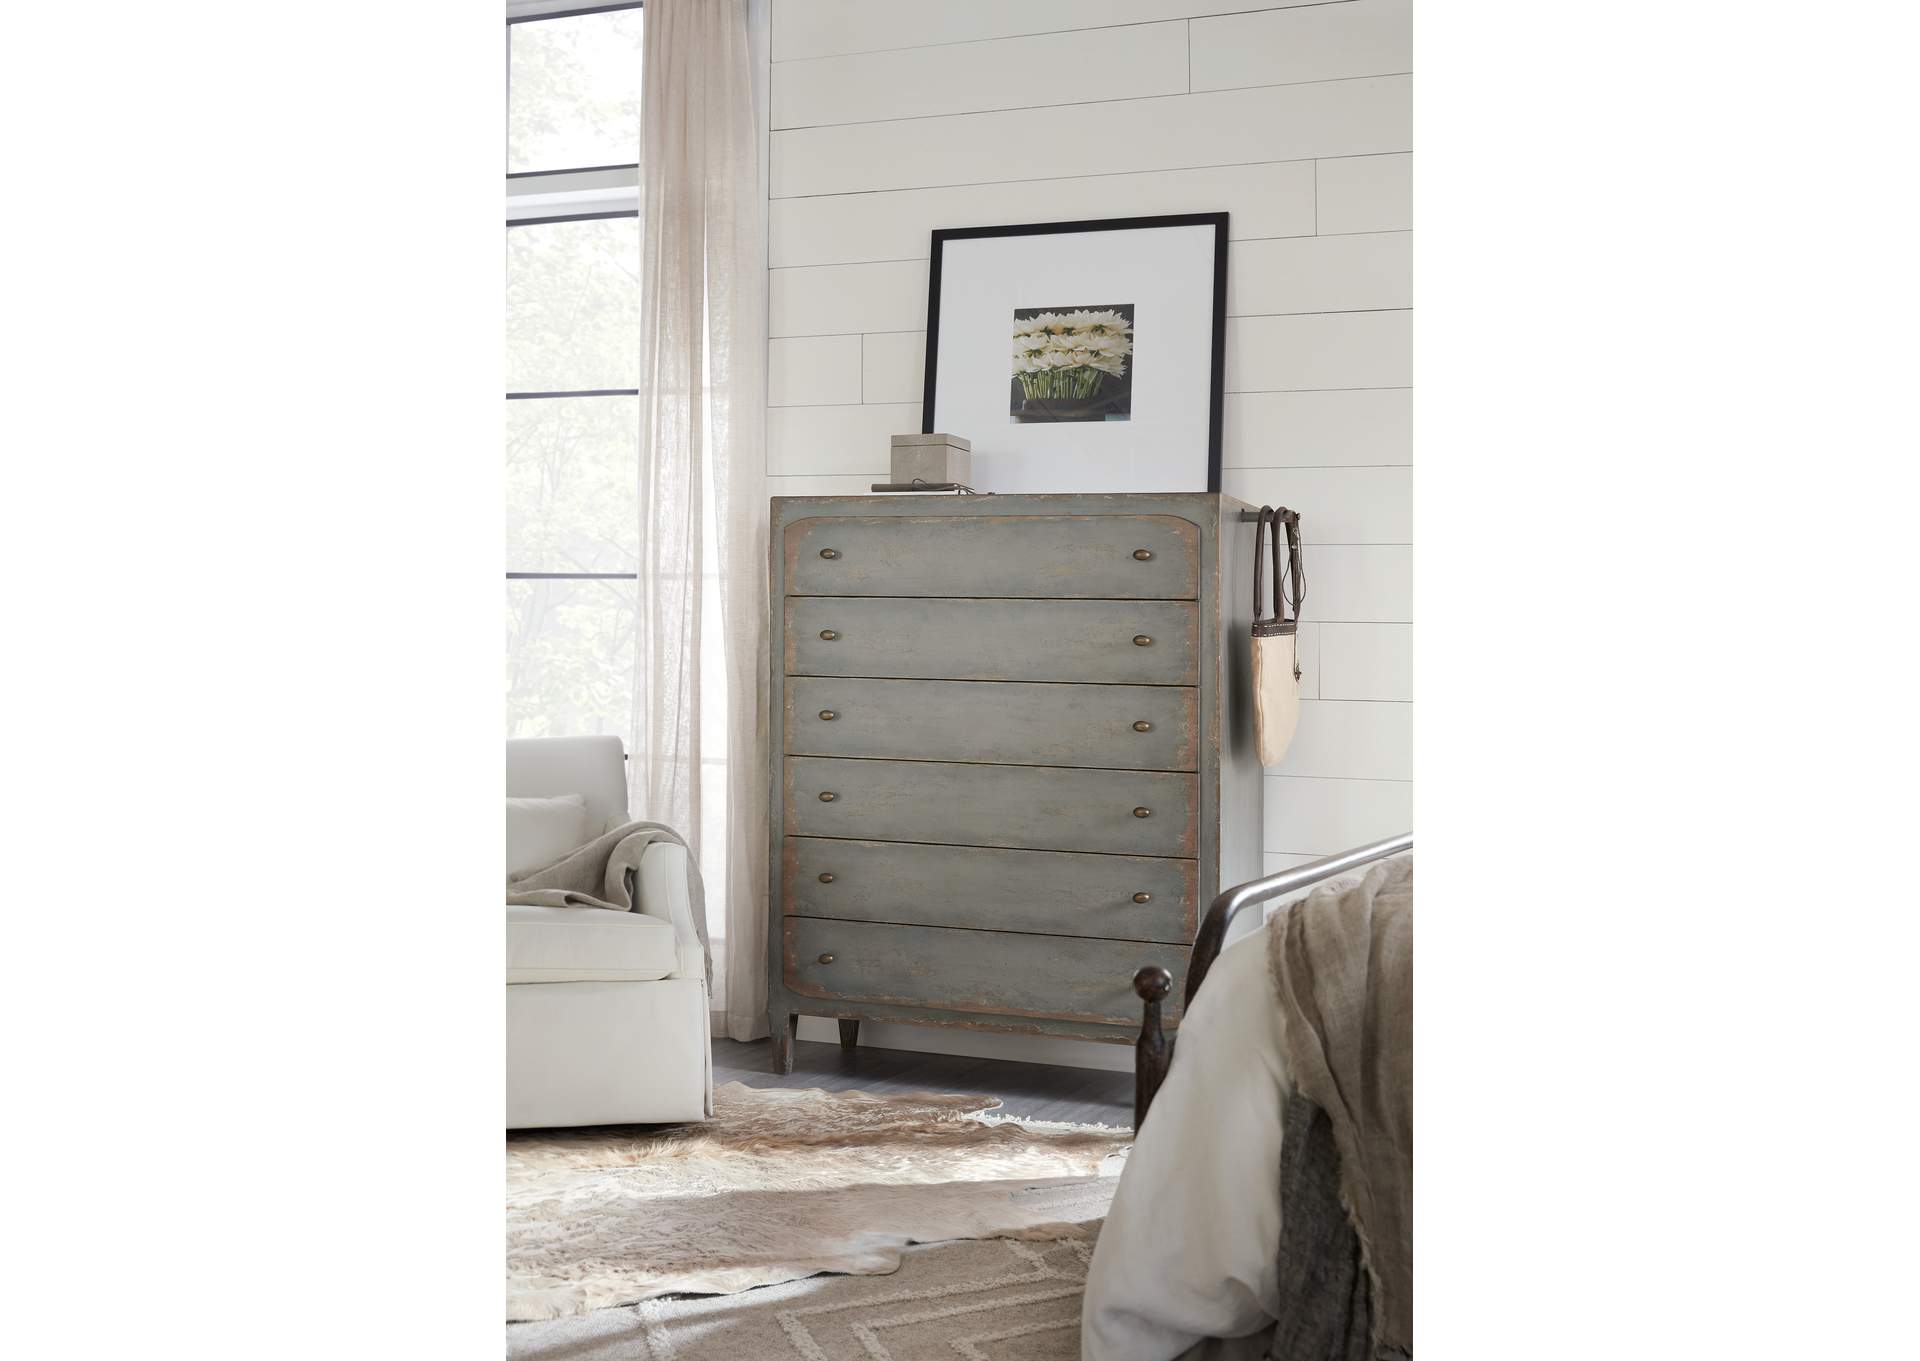 Ciao Bella Six-Drawer Chest- Speckled Gray,Hooker Furniture